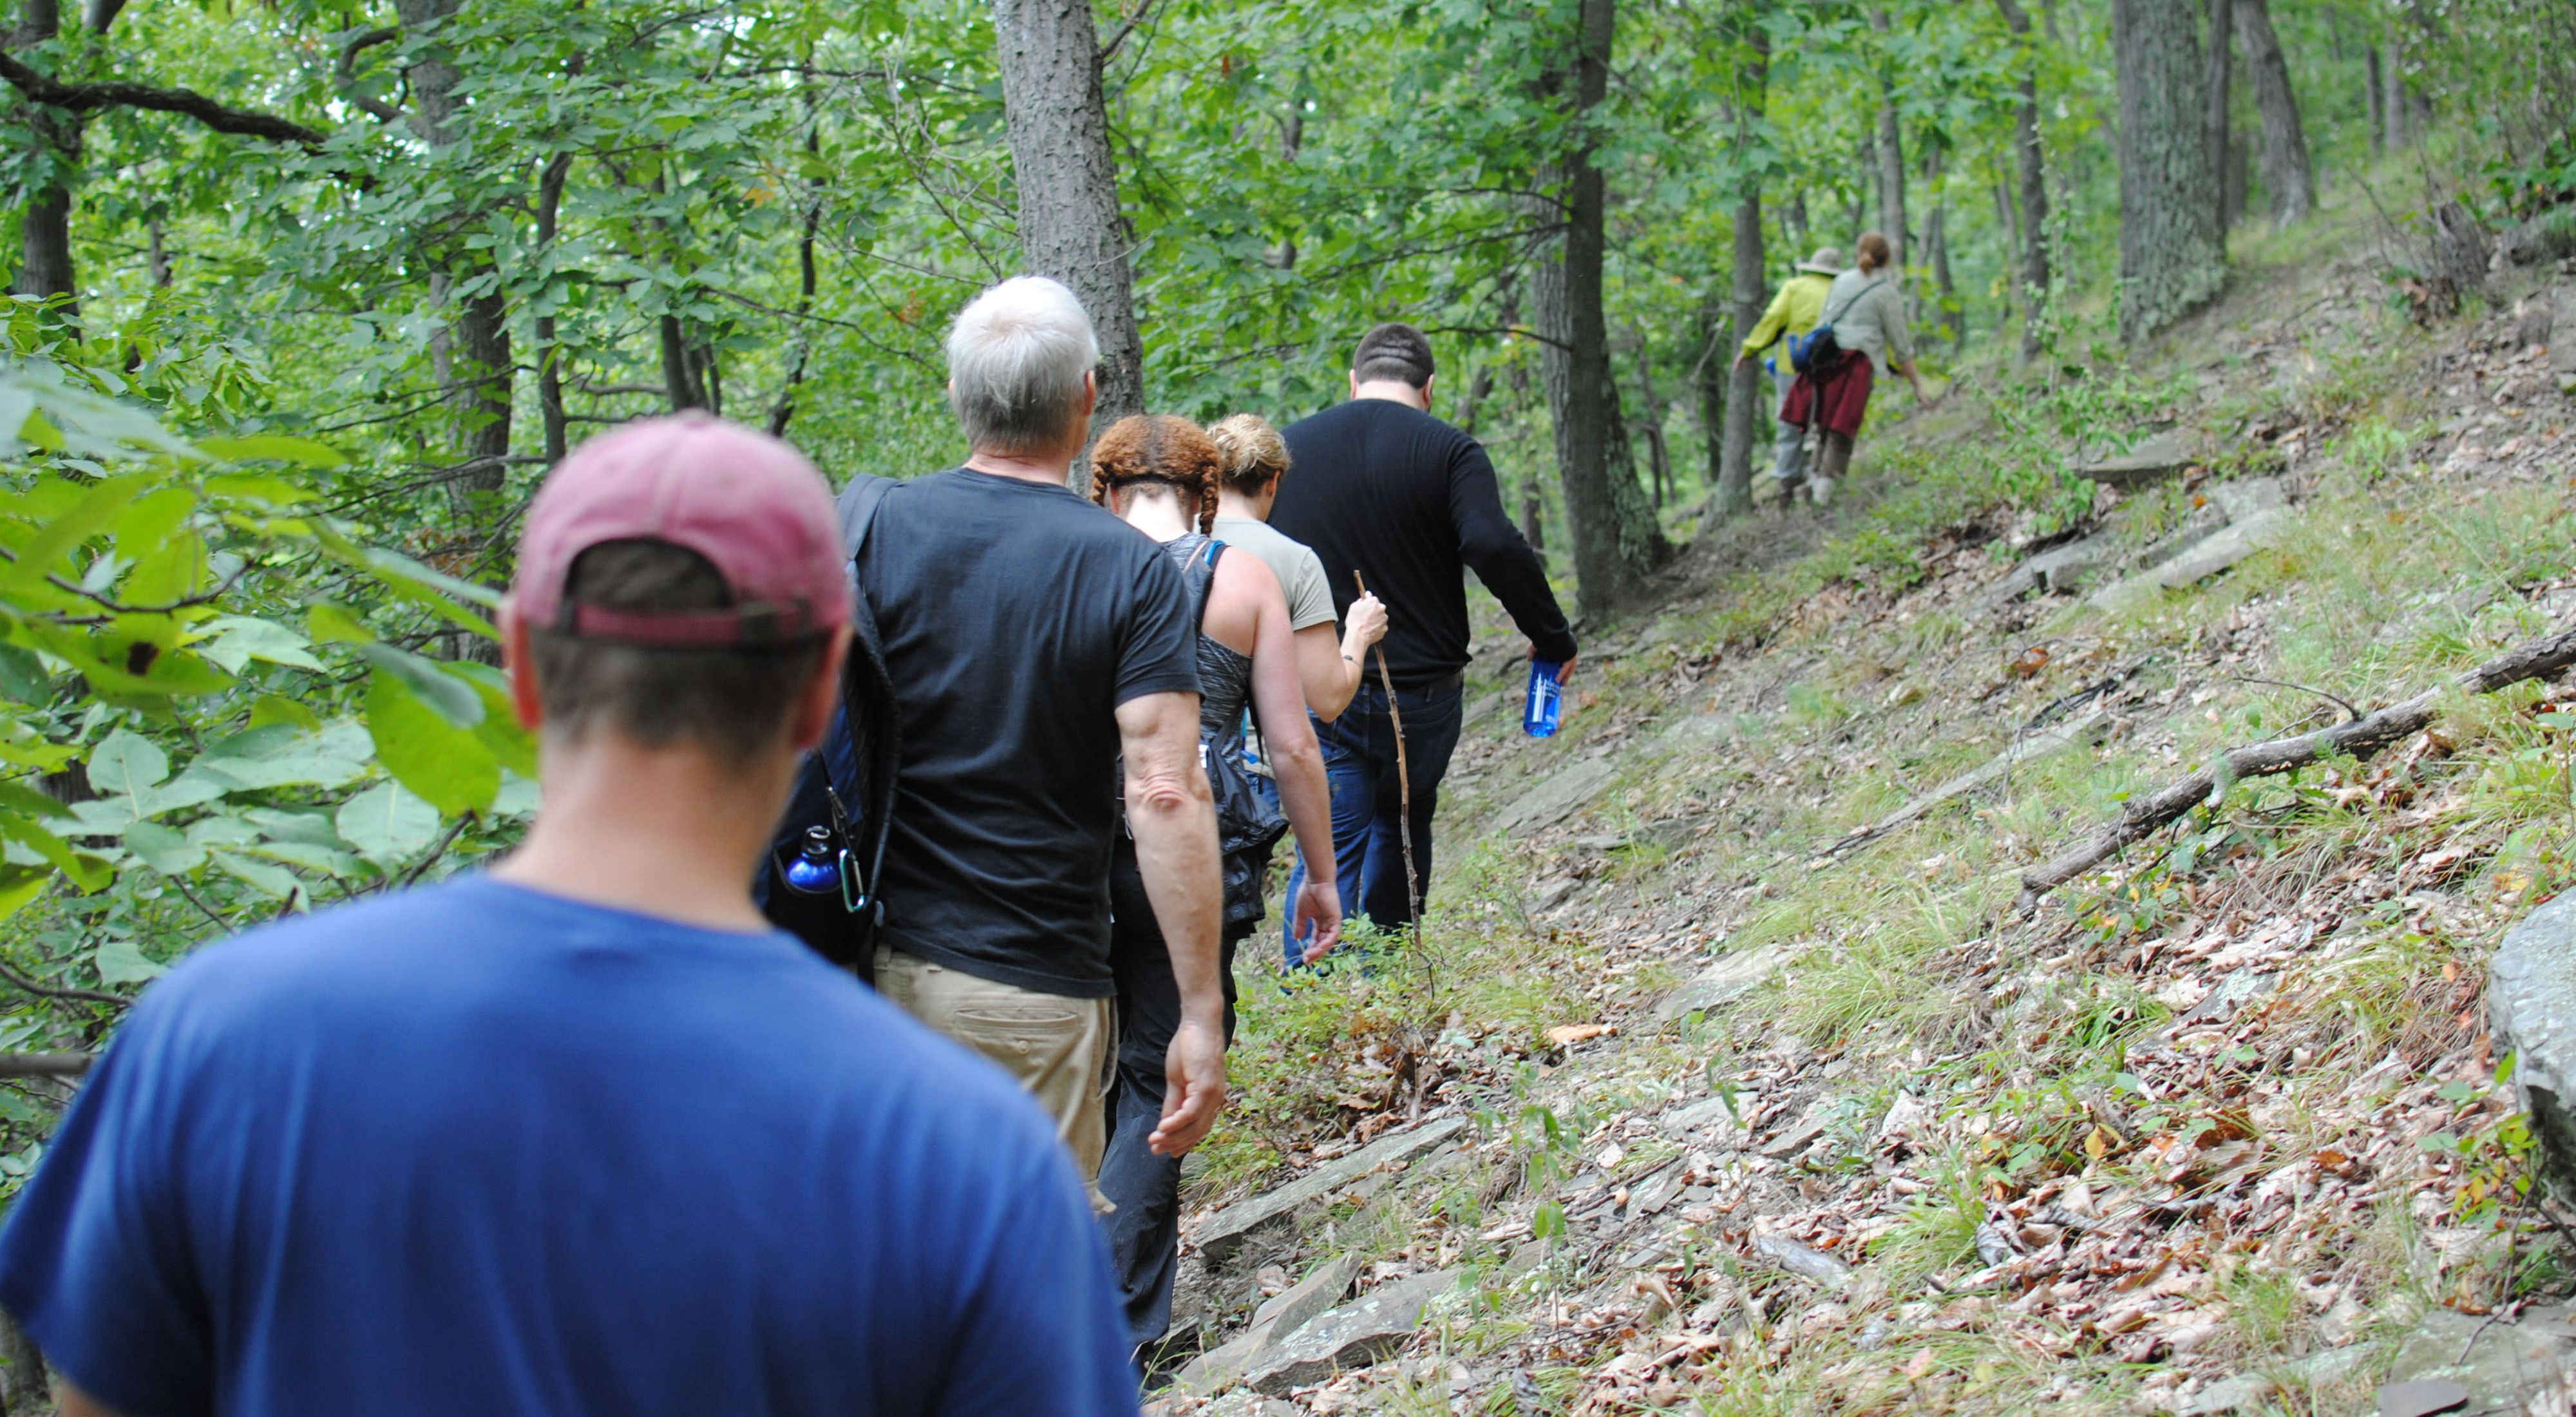 A group of hikers on a trail with backs to the camera.